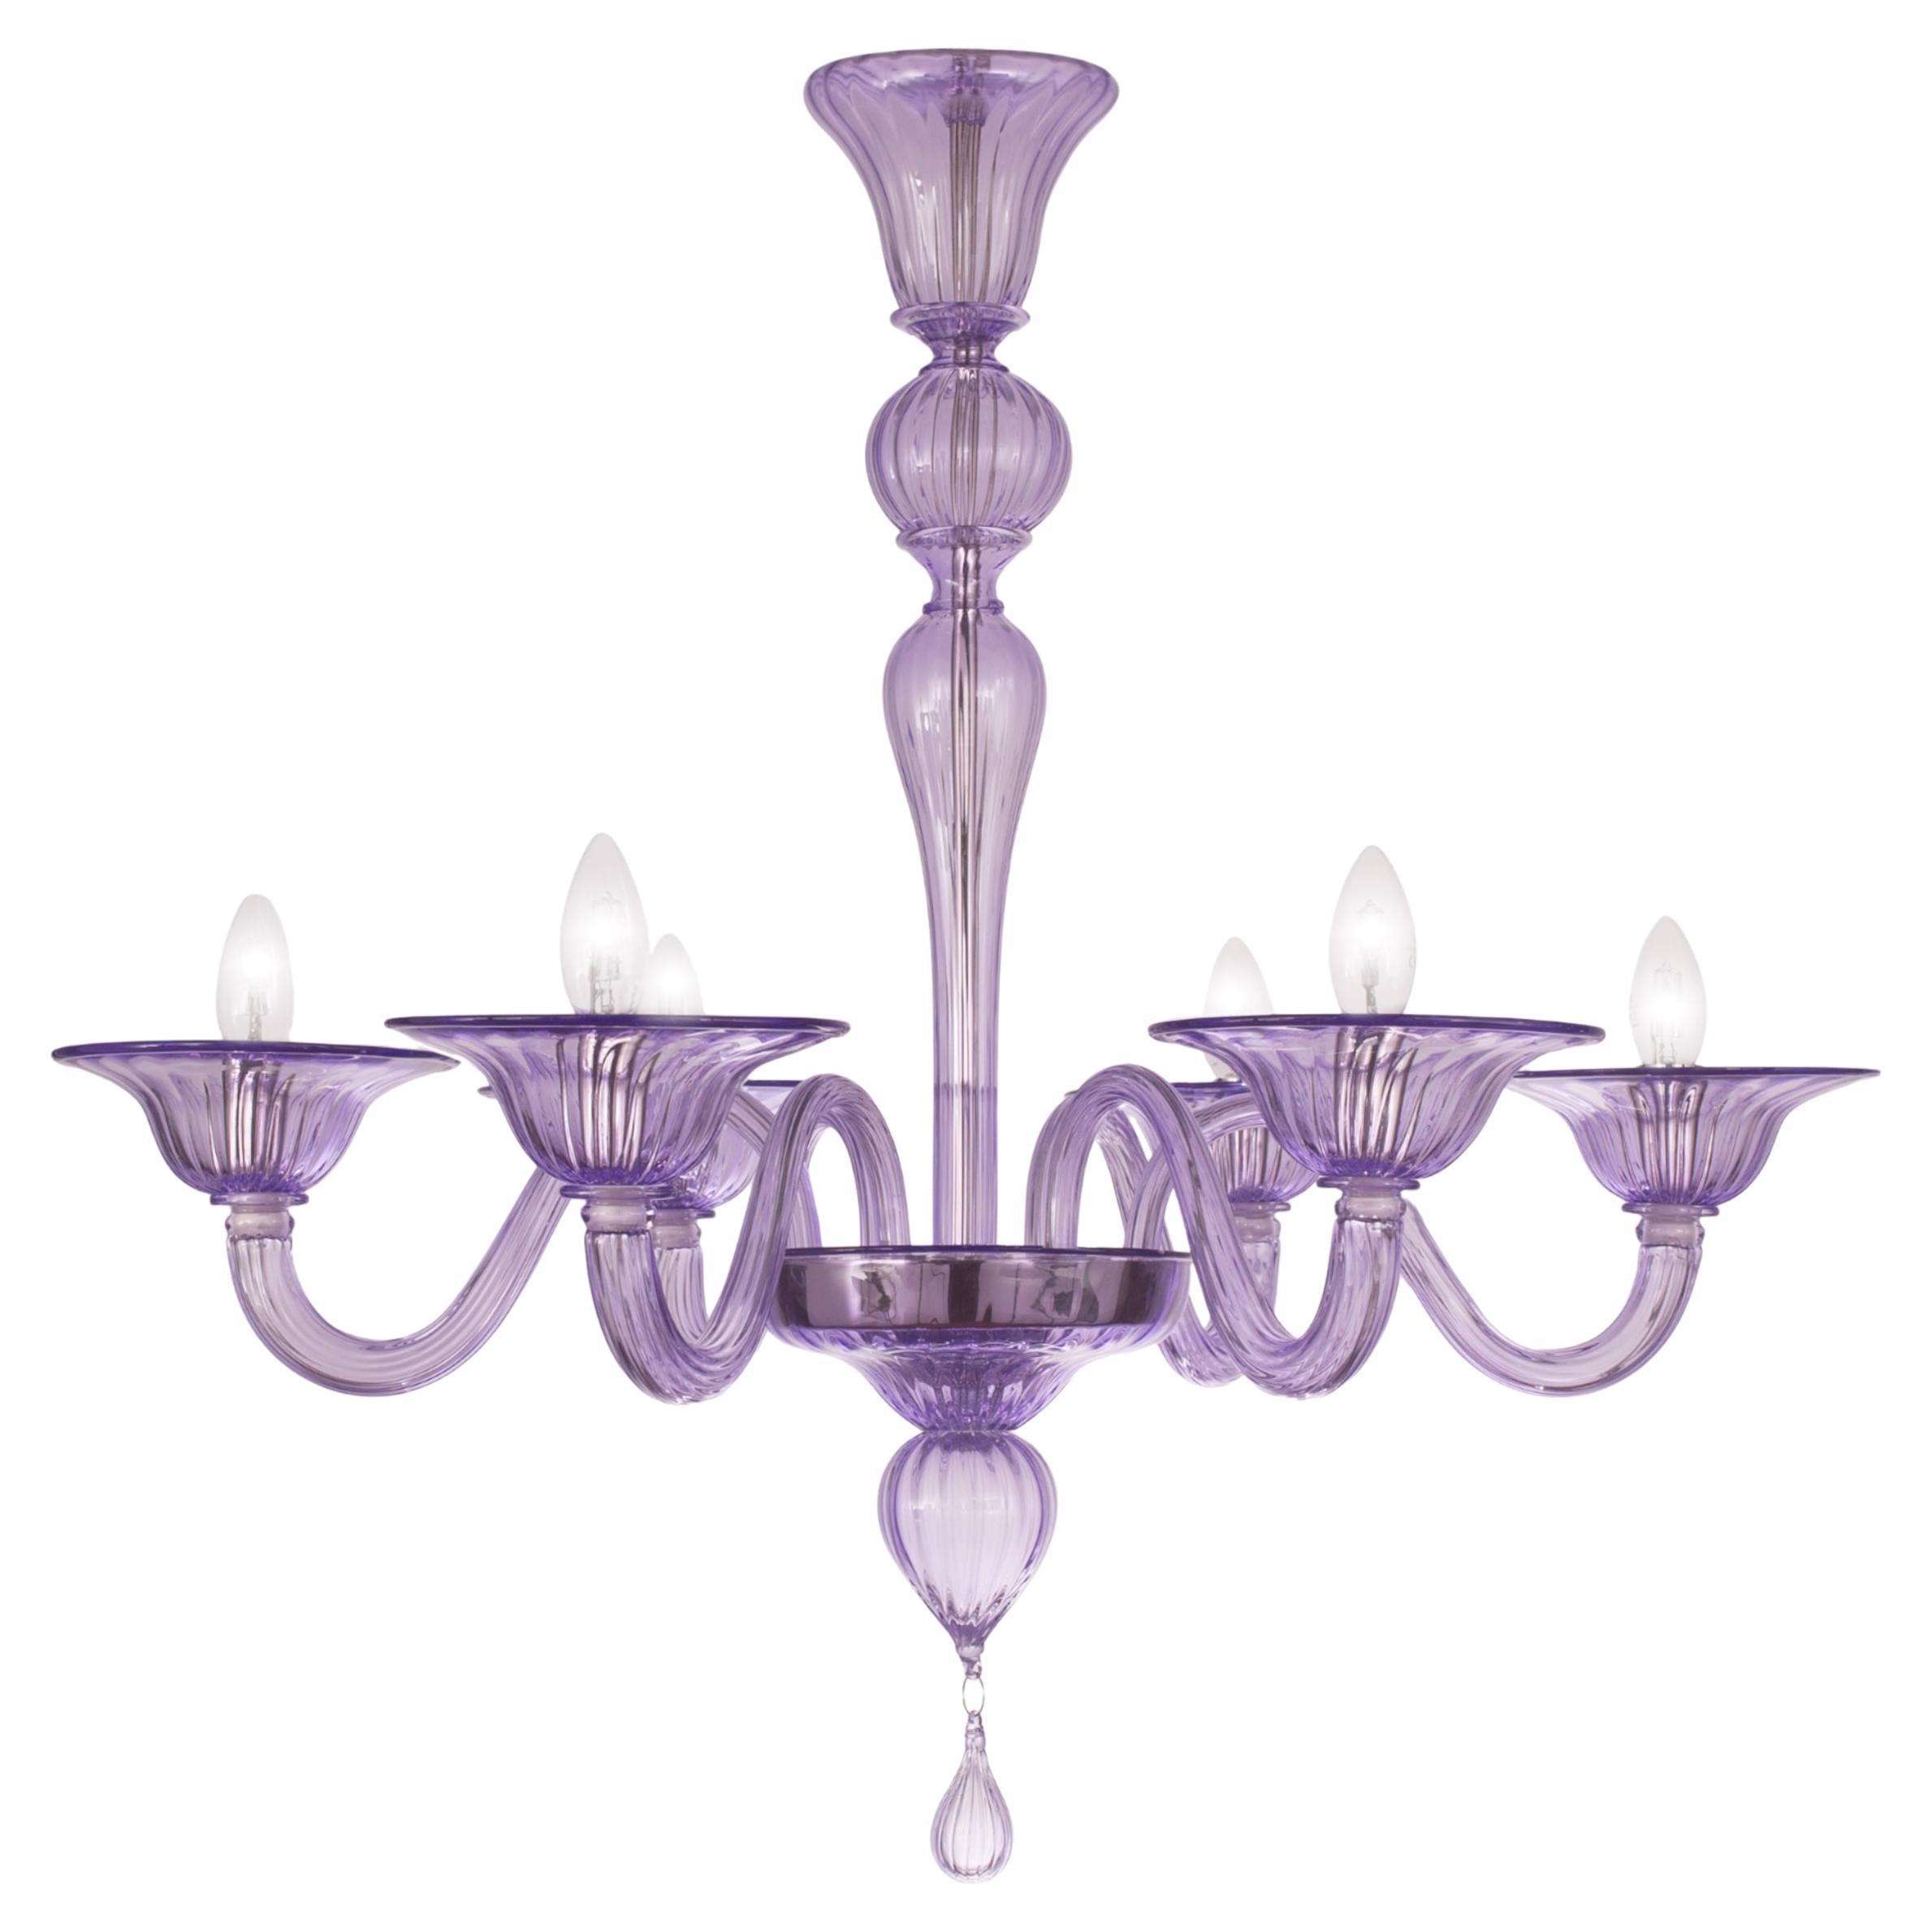 Simplicissimus Chandelier, 6 Arms lilac Murano Glass by Multiforme For Sale